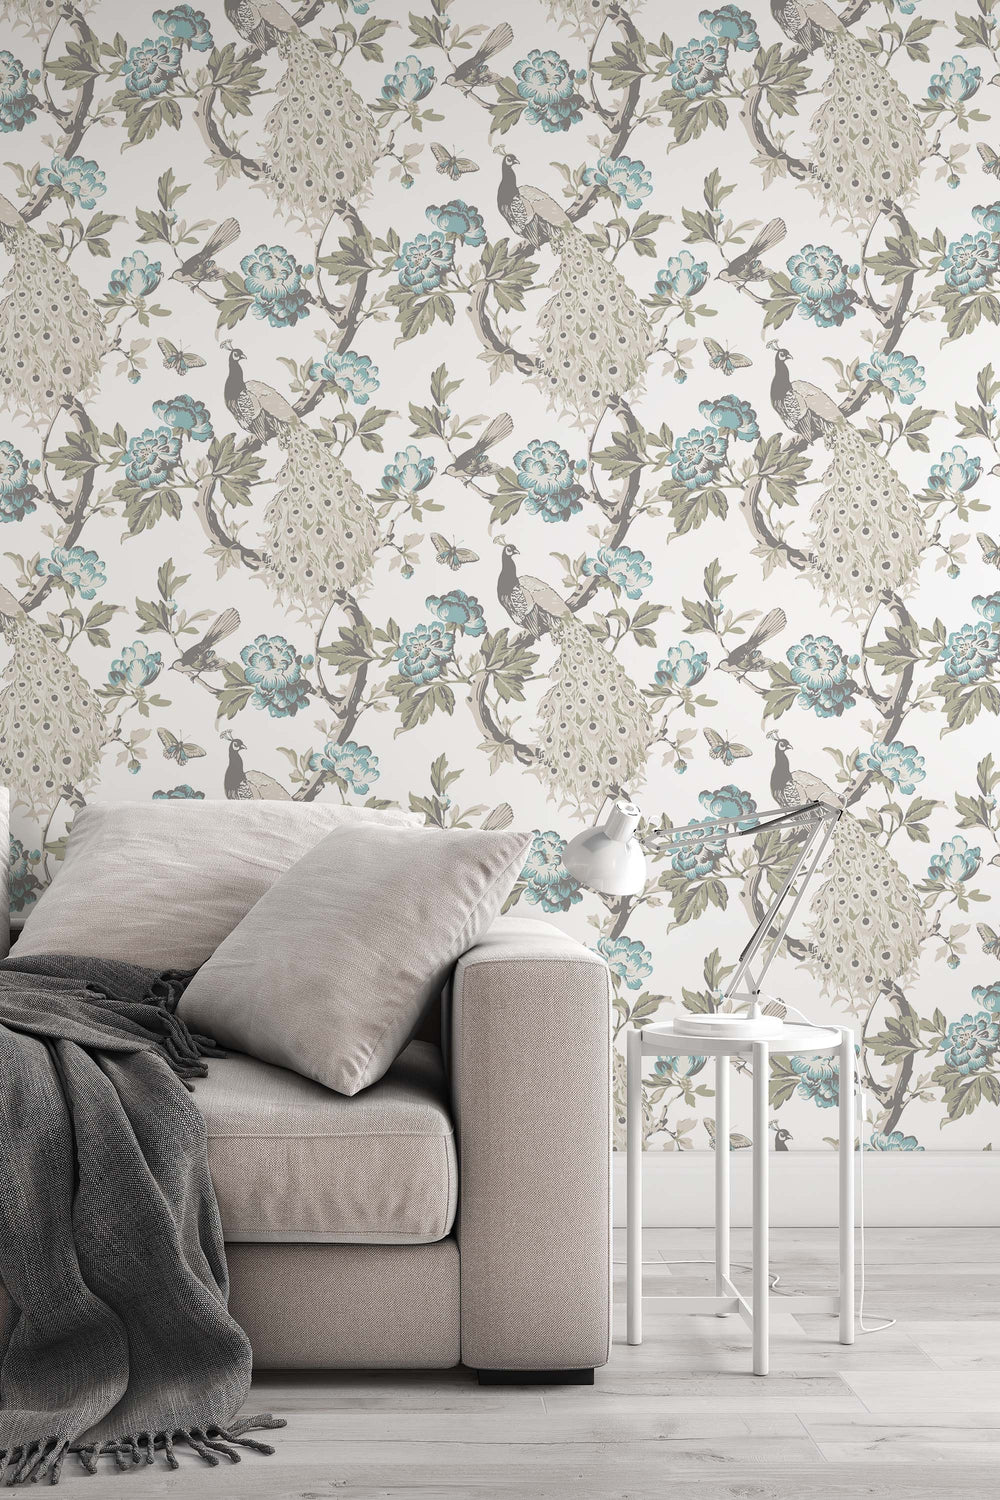 Peacock and flowers Wallcovering - Peel & Stick Wallpaper - Removable Self Adhesive Wallpaper Roll pattern wallpaper design#3286